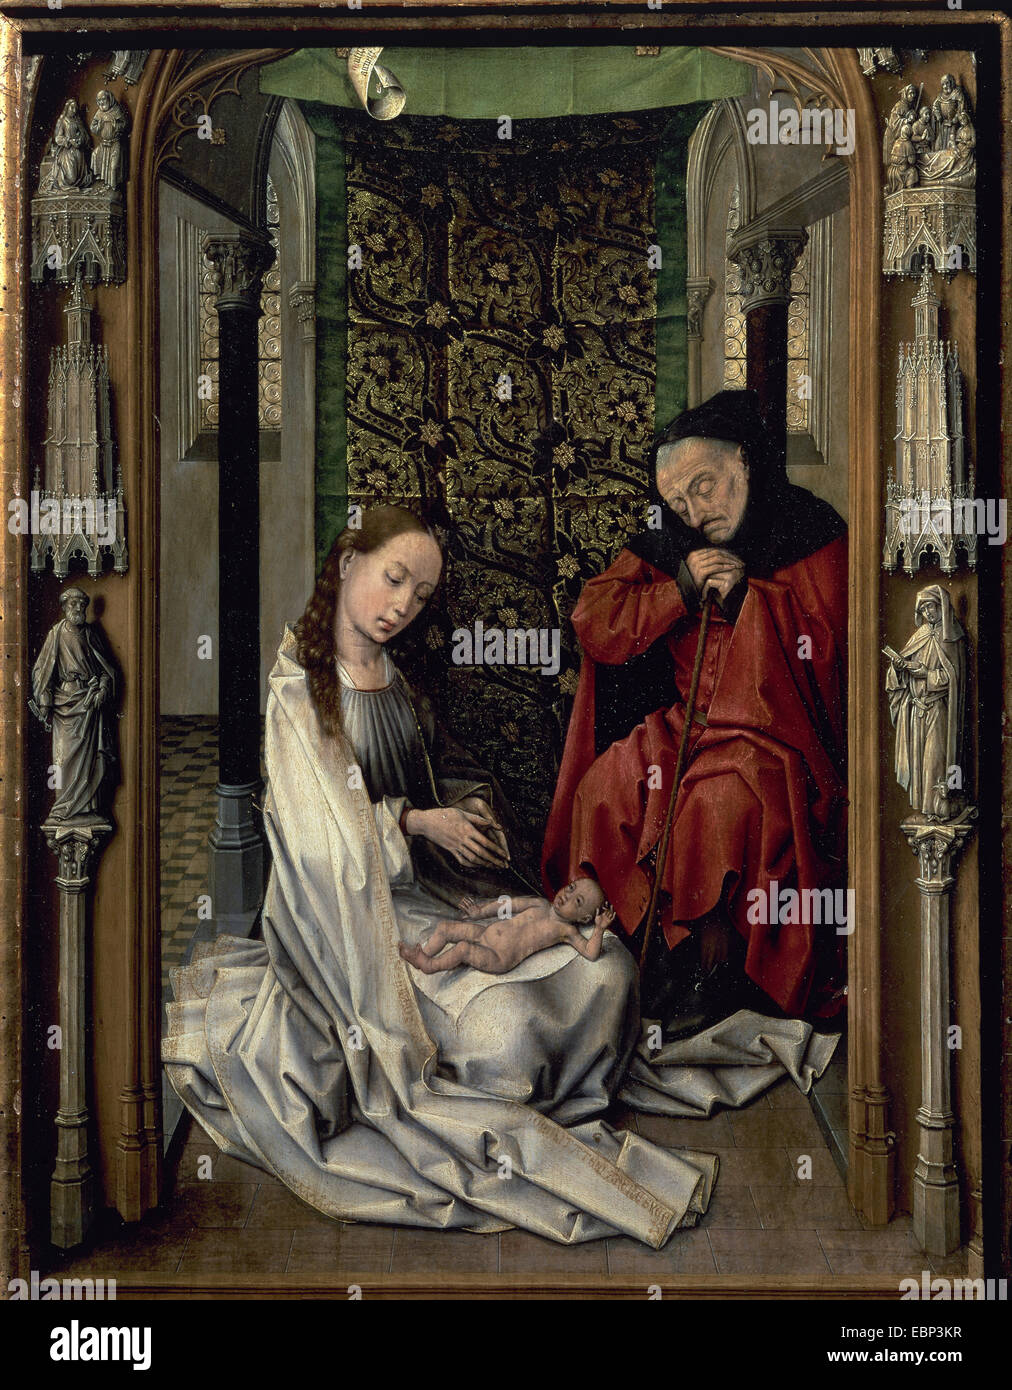 Gothic art. Miraflores Altarpiece.  Panel altarpiece by Early Netherlandish painter  Rogier van der Weyden (1399/1400-1464). Triptych. Panel of the Nativity. Oil on panel. Royal Chapel of Granada. Andalusia. Spain. Stock Photo